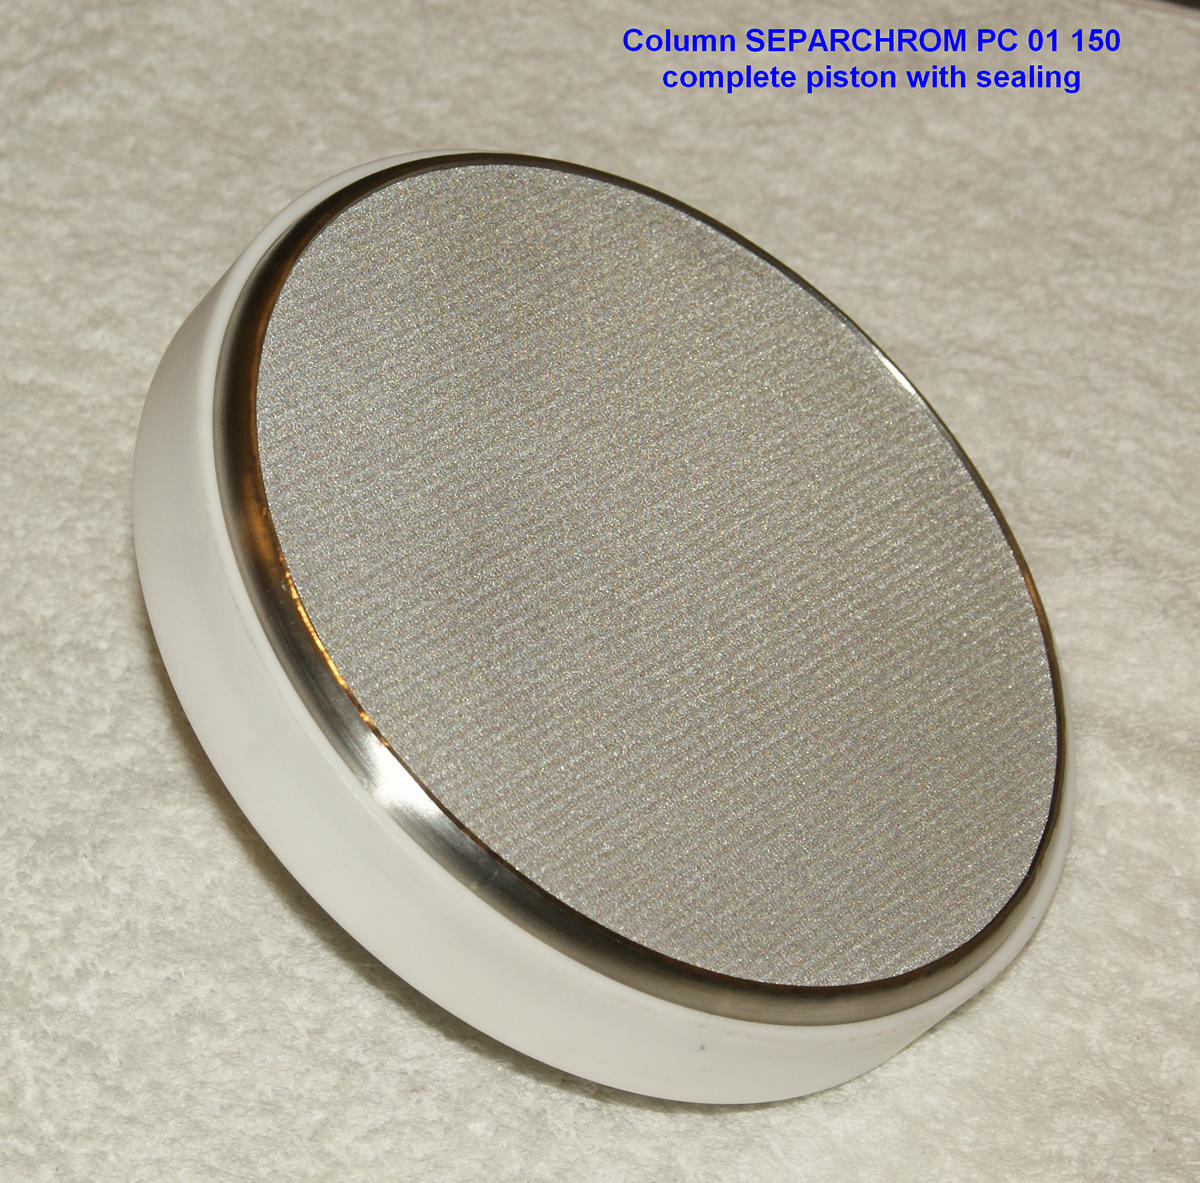 SEPARCHROM PC01 150 COMPLETE PISTON WITH SEALING